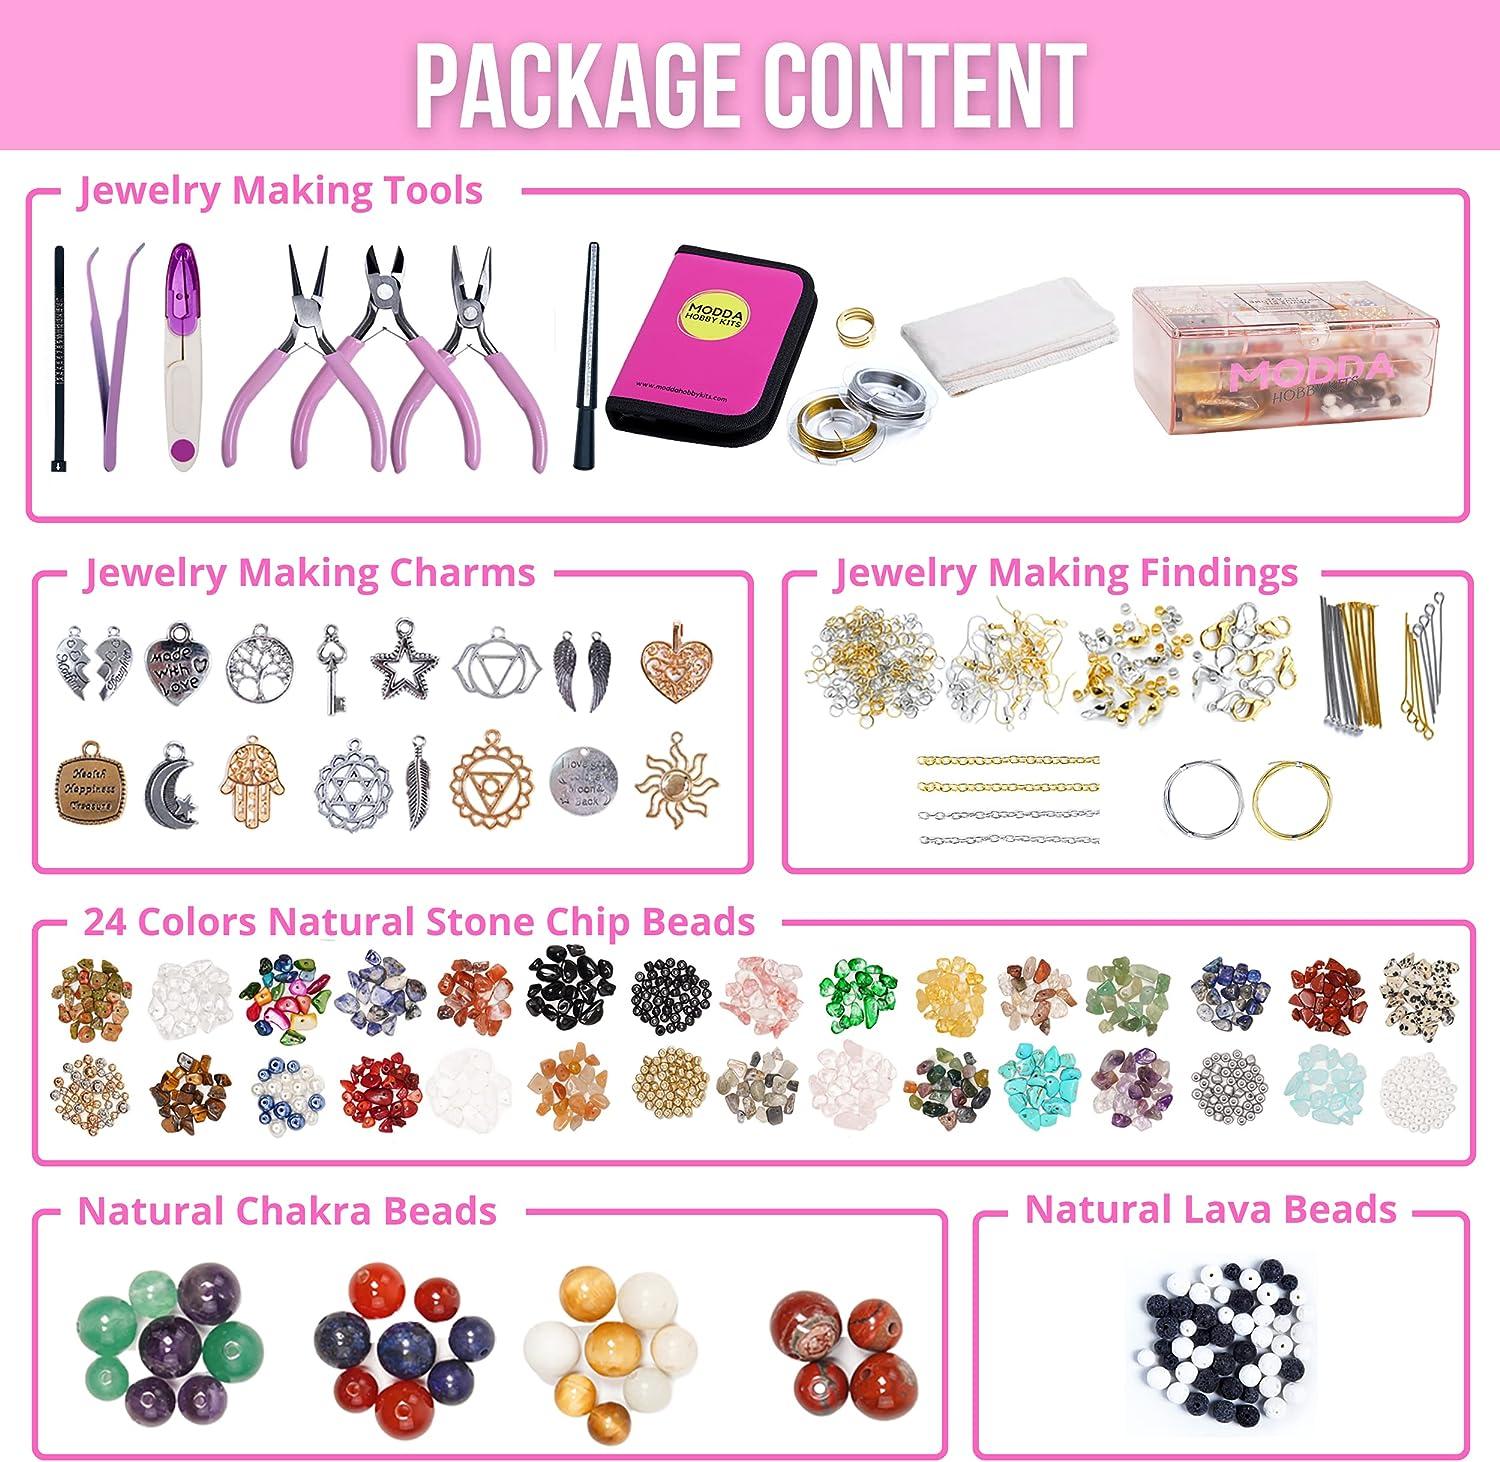  MODDA Jewelry Making Supplies - Jewelry Making Kits for Adults,  Teens, Girls, Beginners, Women - Includes Instructions, Tools, Beads,  Charms for Necklace, Earring, Bracelet Making Kit - Purple Set